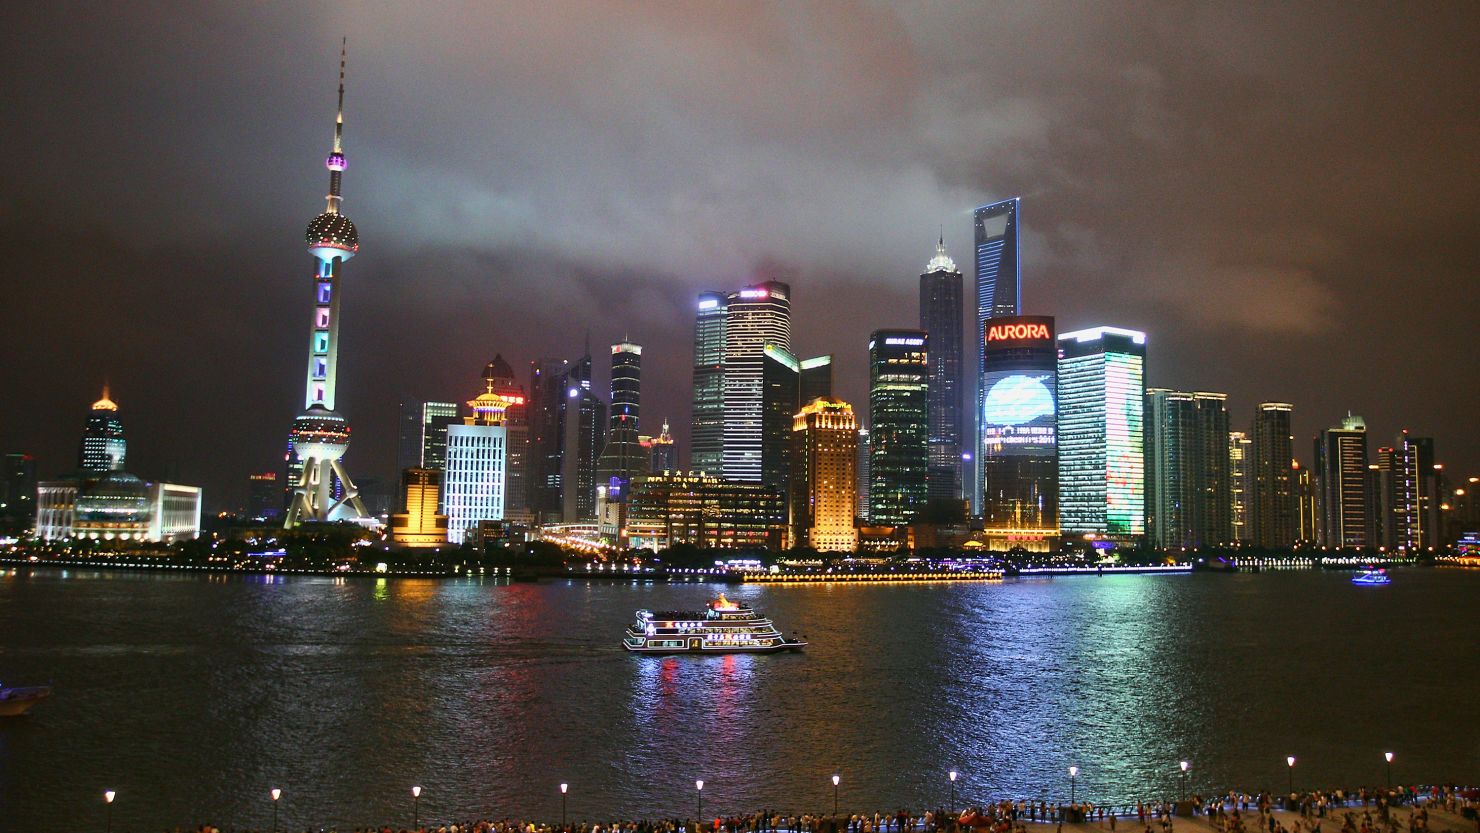 File photo of a sightseeing ship on the Huangpu River against the night skyline of Shanghai's financial district on July 15.